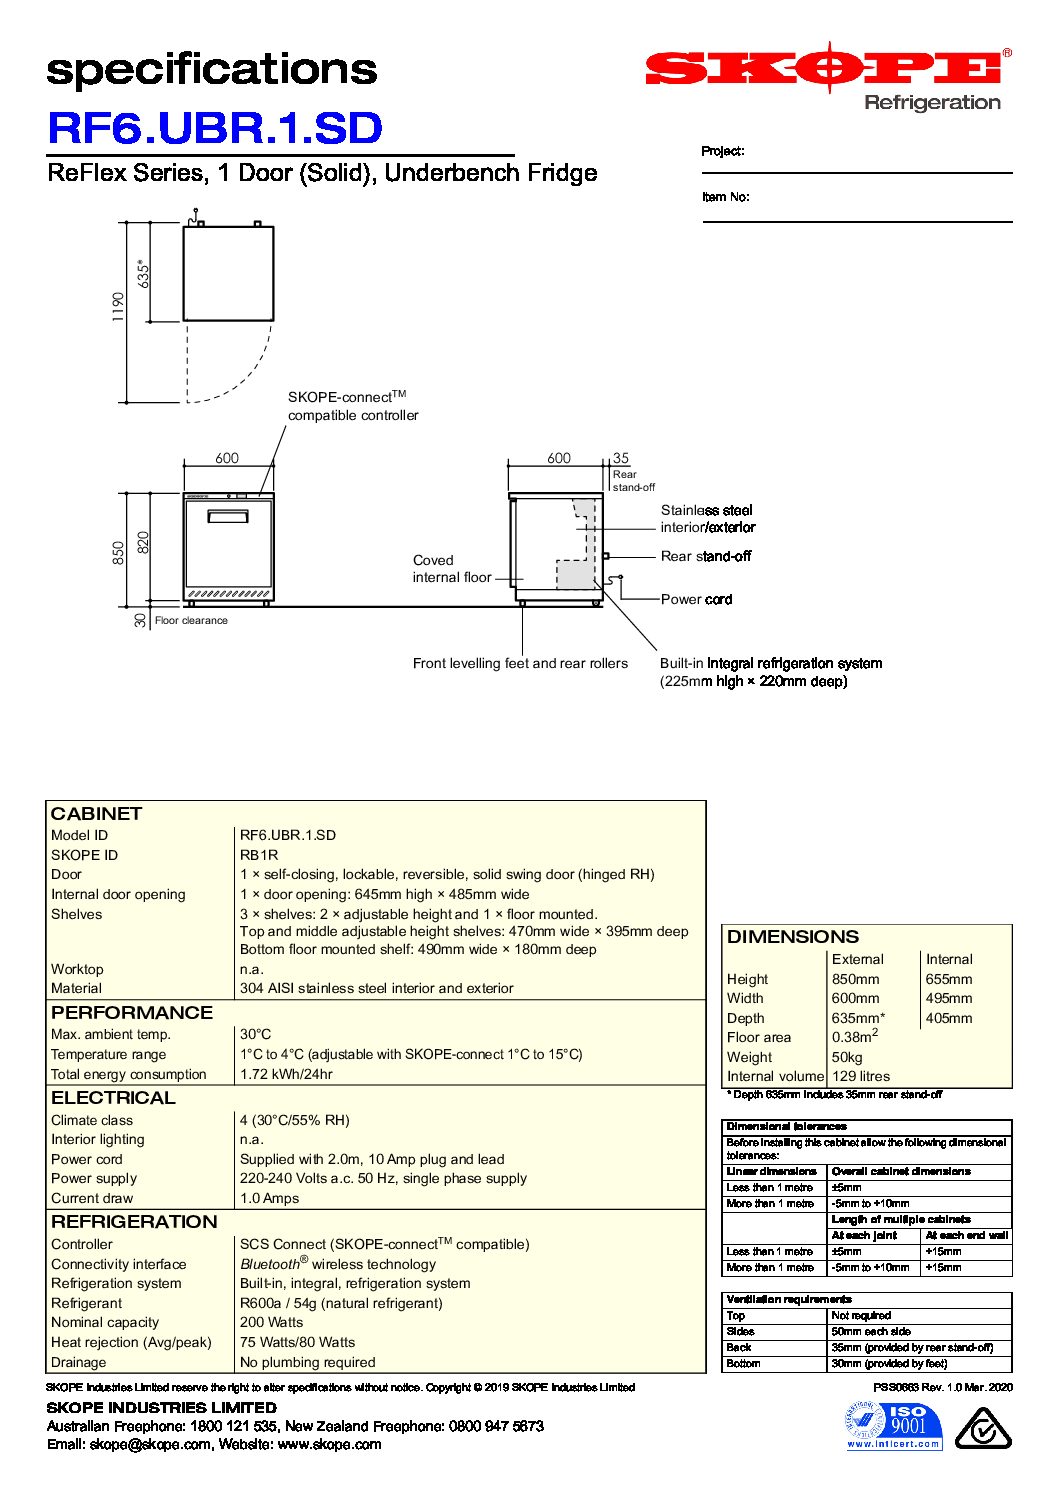 cover page of the ReFlex 1 Solid Door Underbench Fridge specification sheet pdf